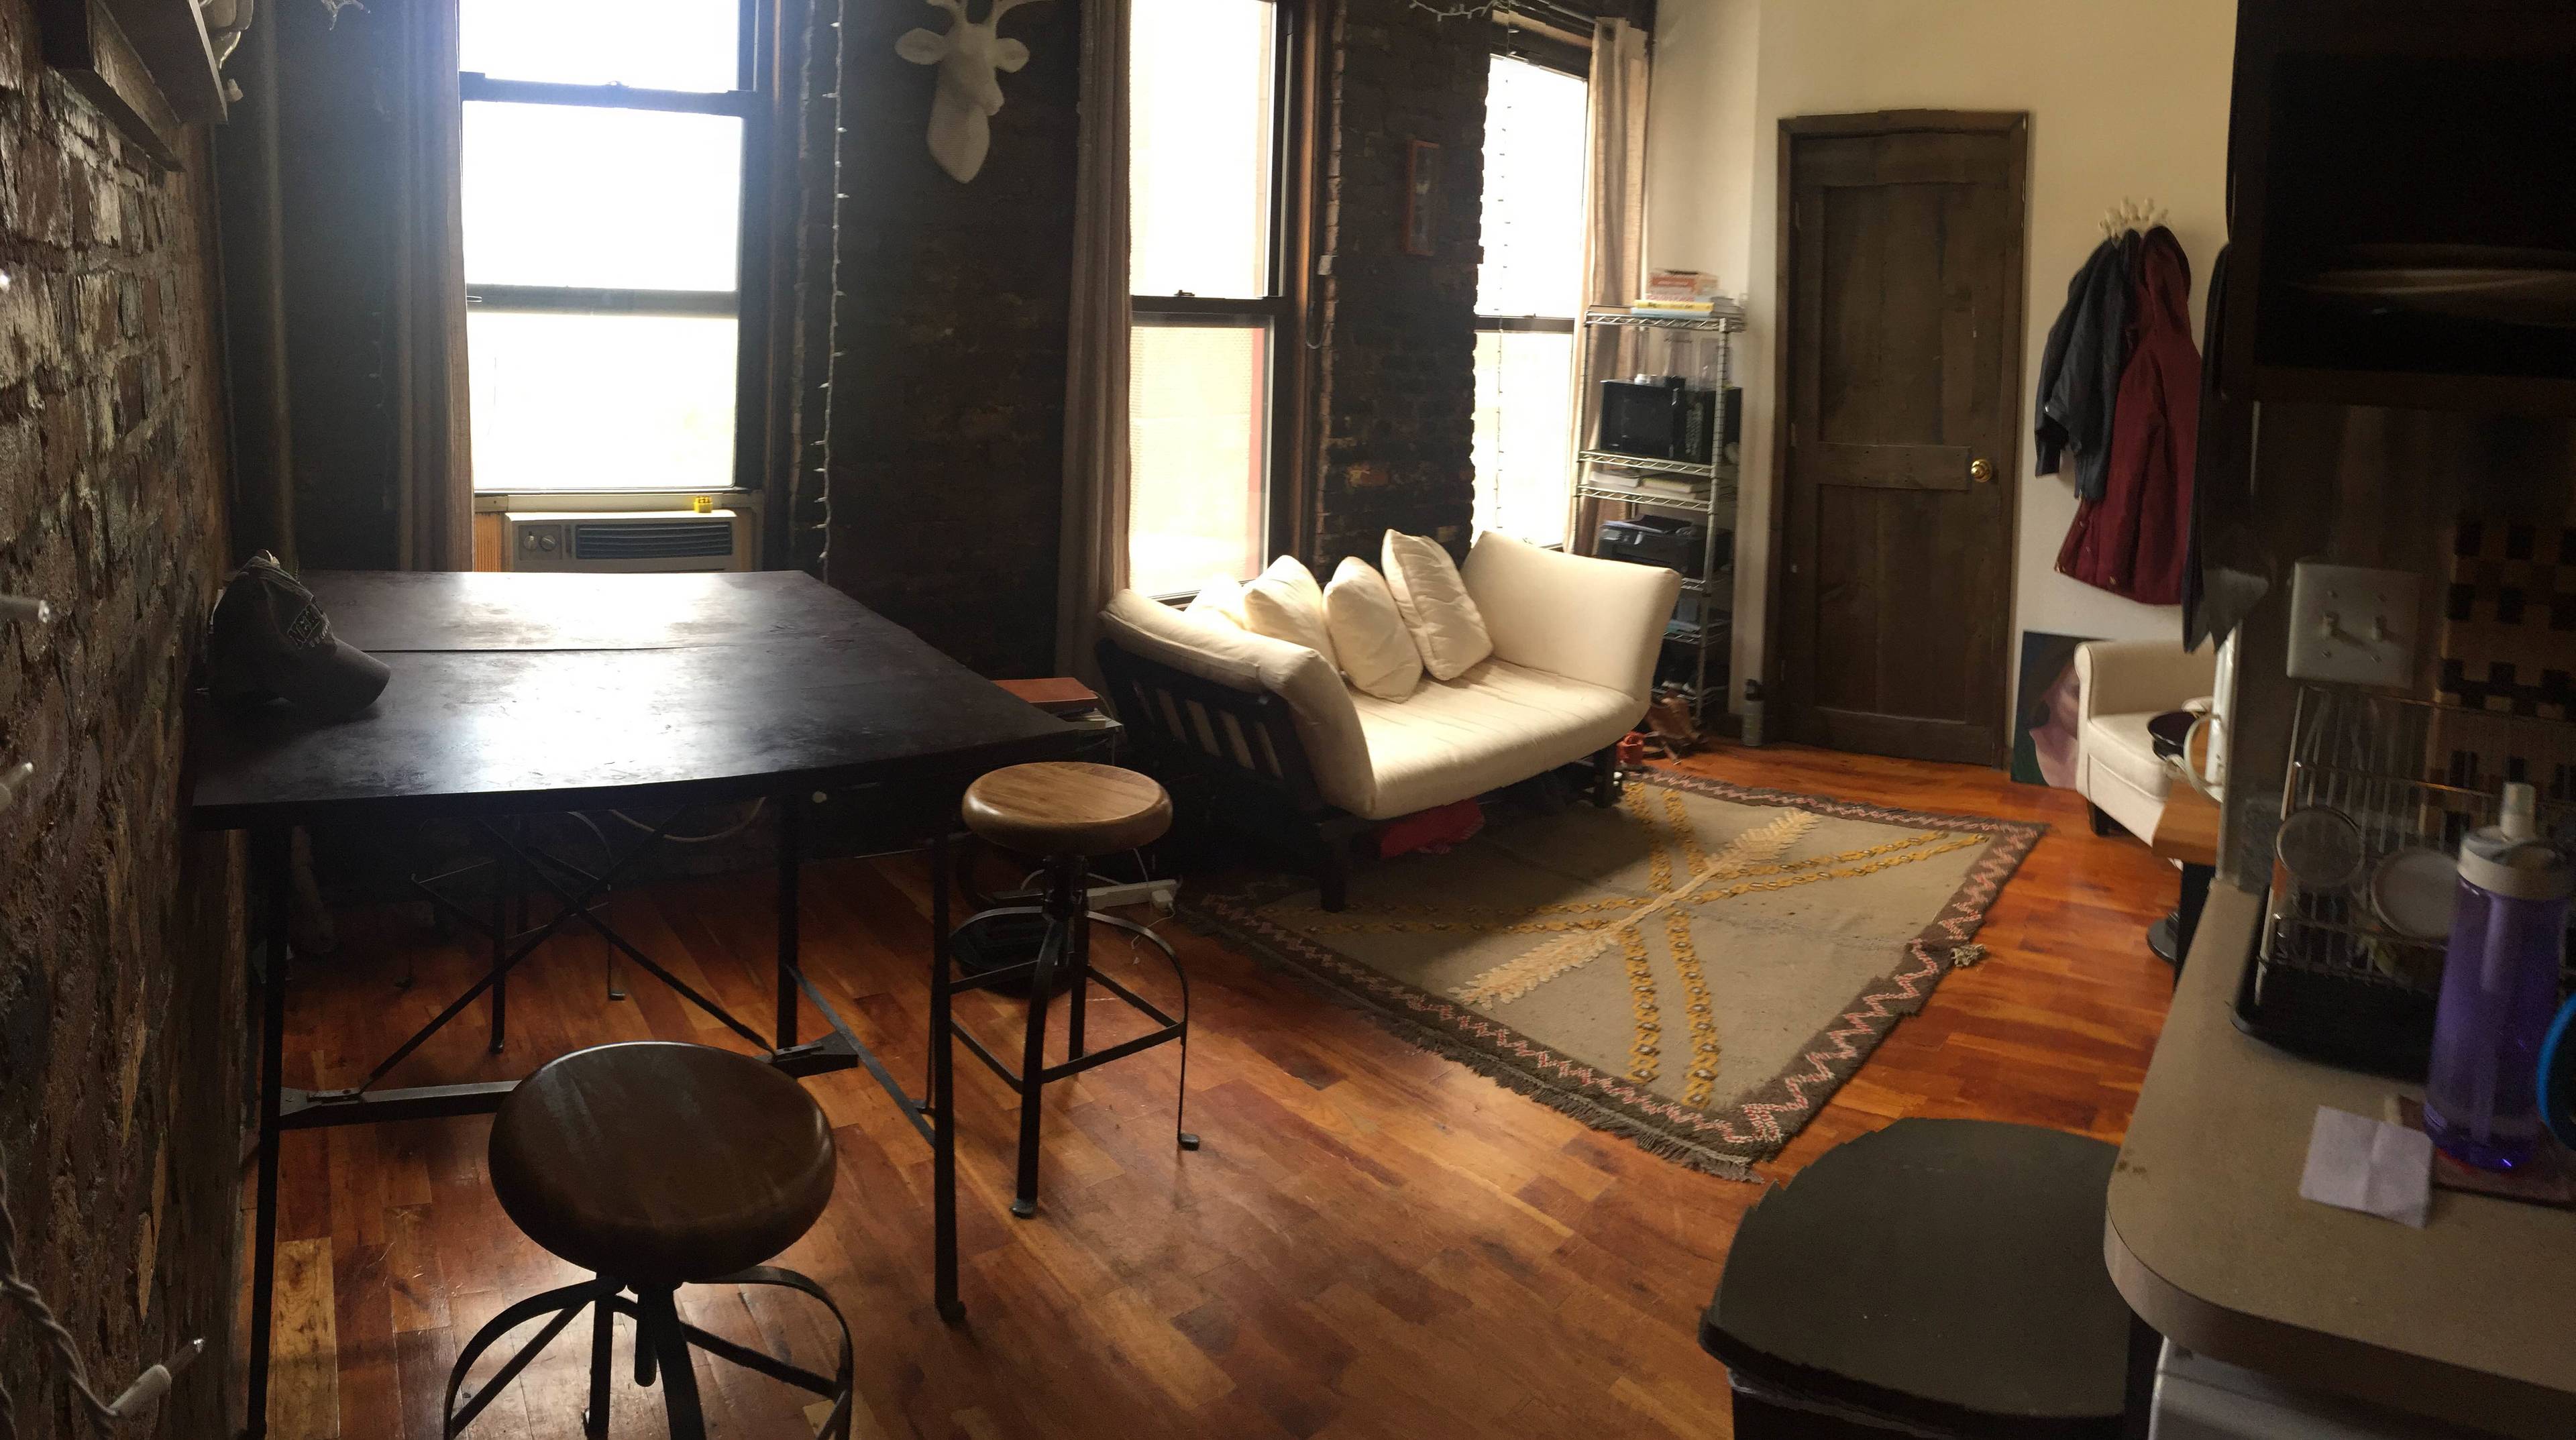 East Village: 3 Bedroom with Washer Dryer in Unit